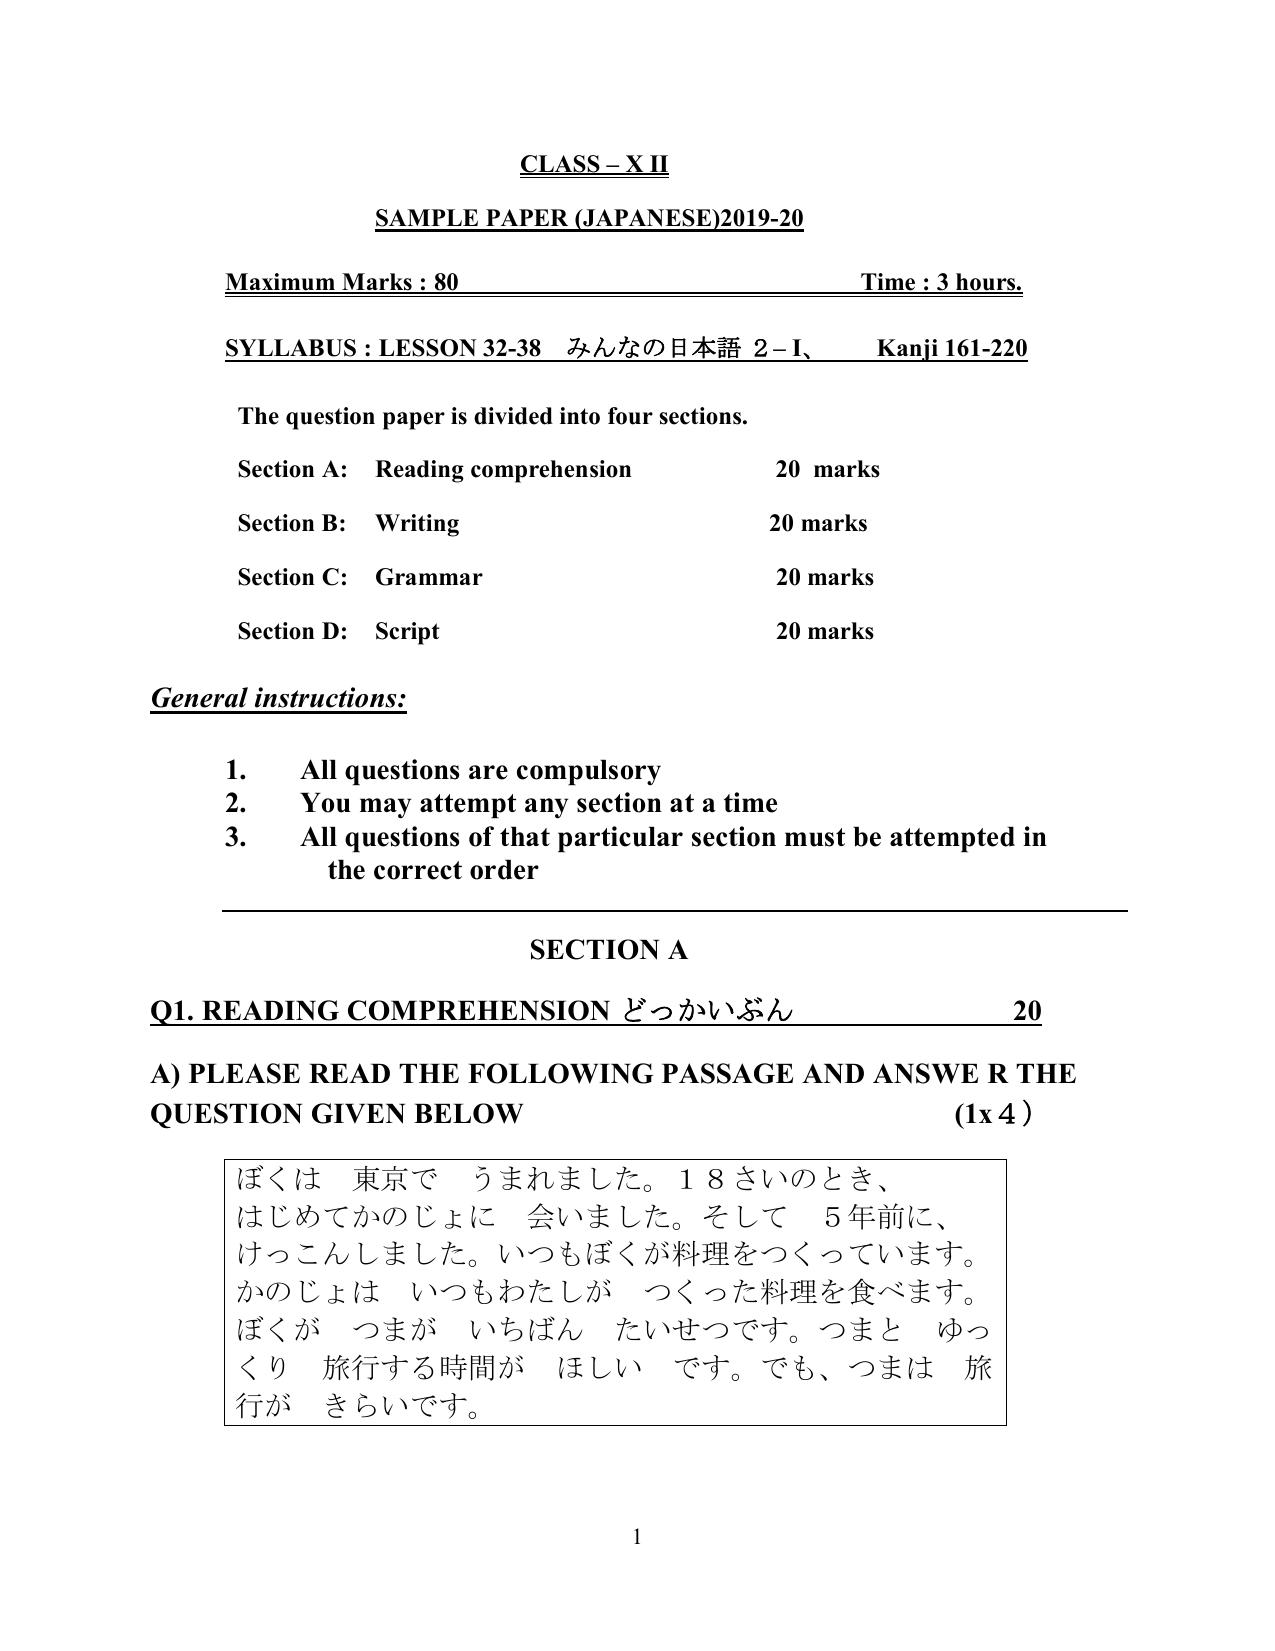 CBSE Class 12 Japanese -Sample Paper 2019-20 - Page 1